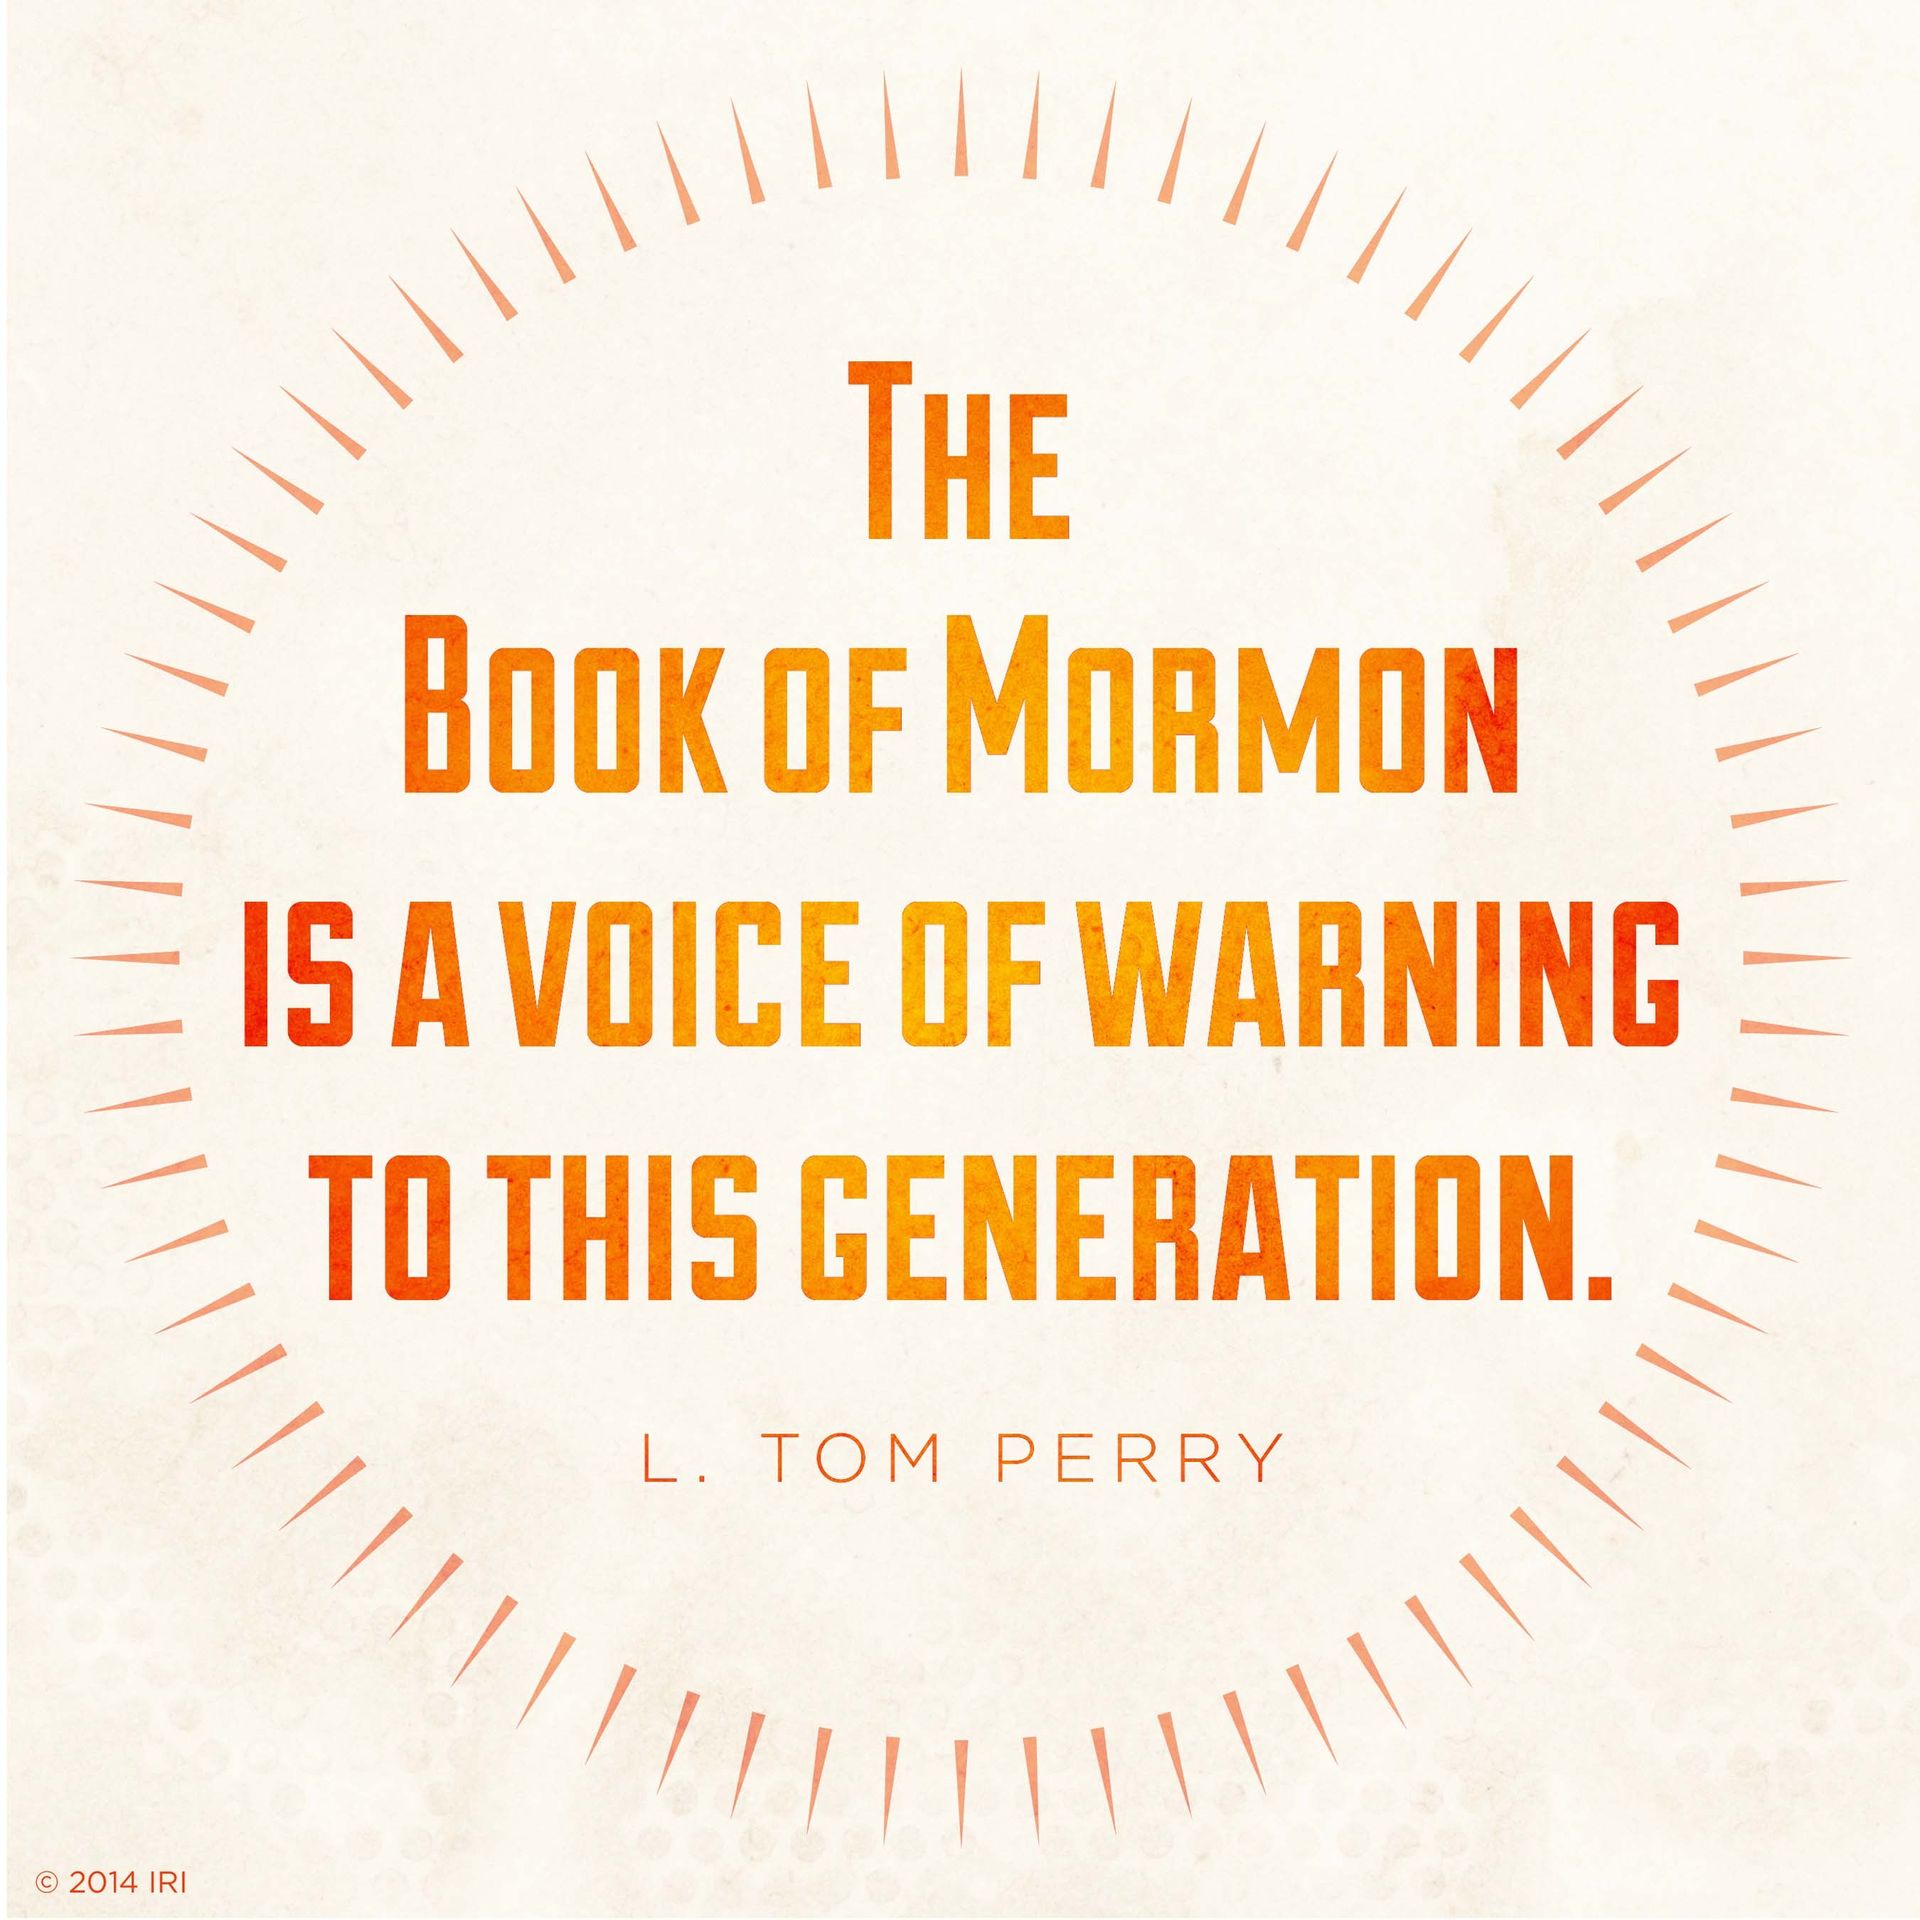 “The Book of Mormon is a voice of warning to this generation.”—Elder L. Tom Perry, “Blessings Resulting from Reading the Book of Mormon”